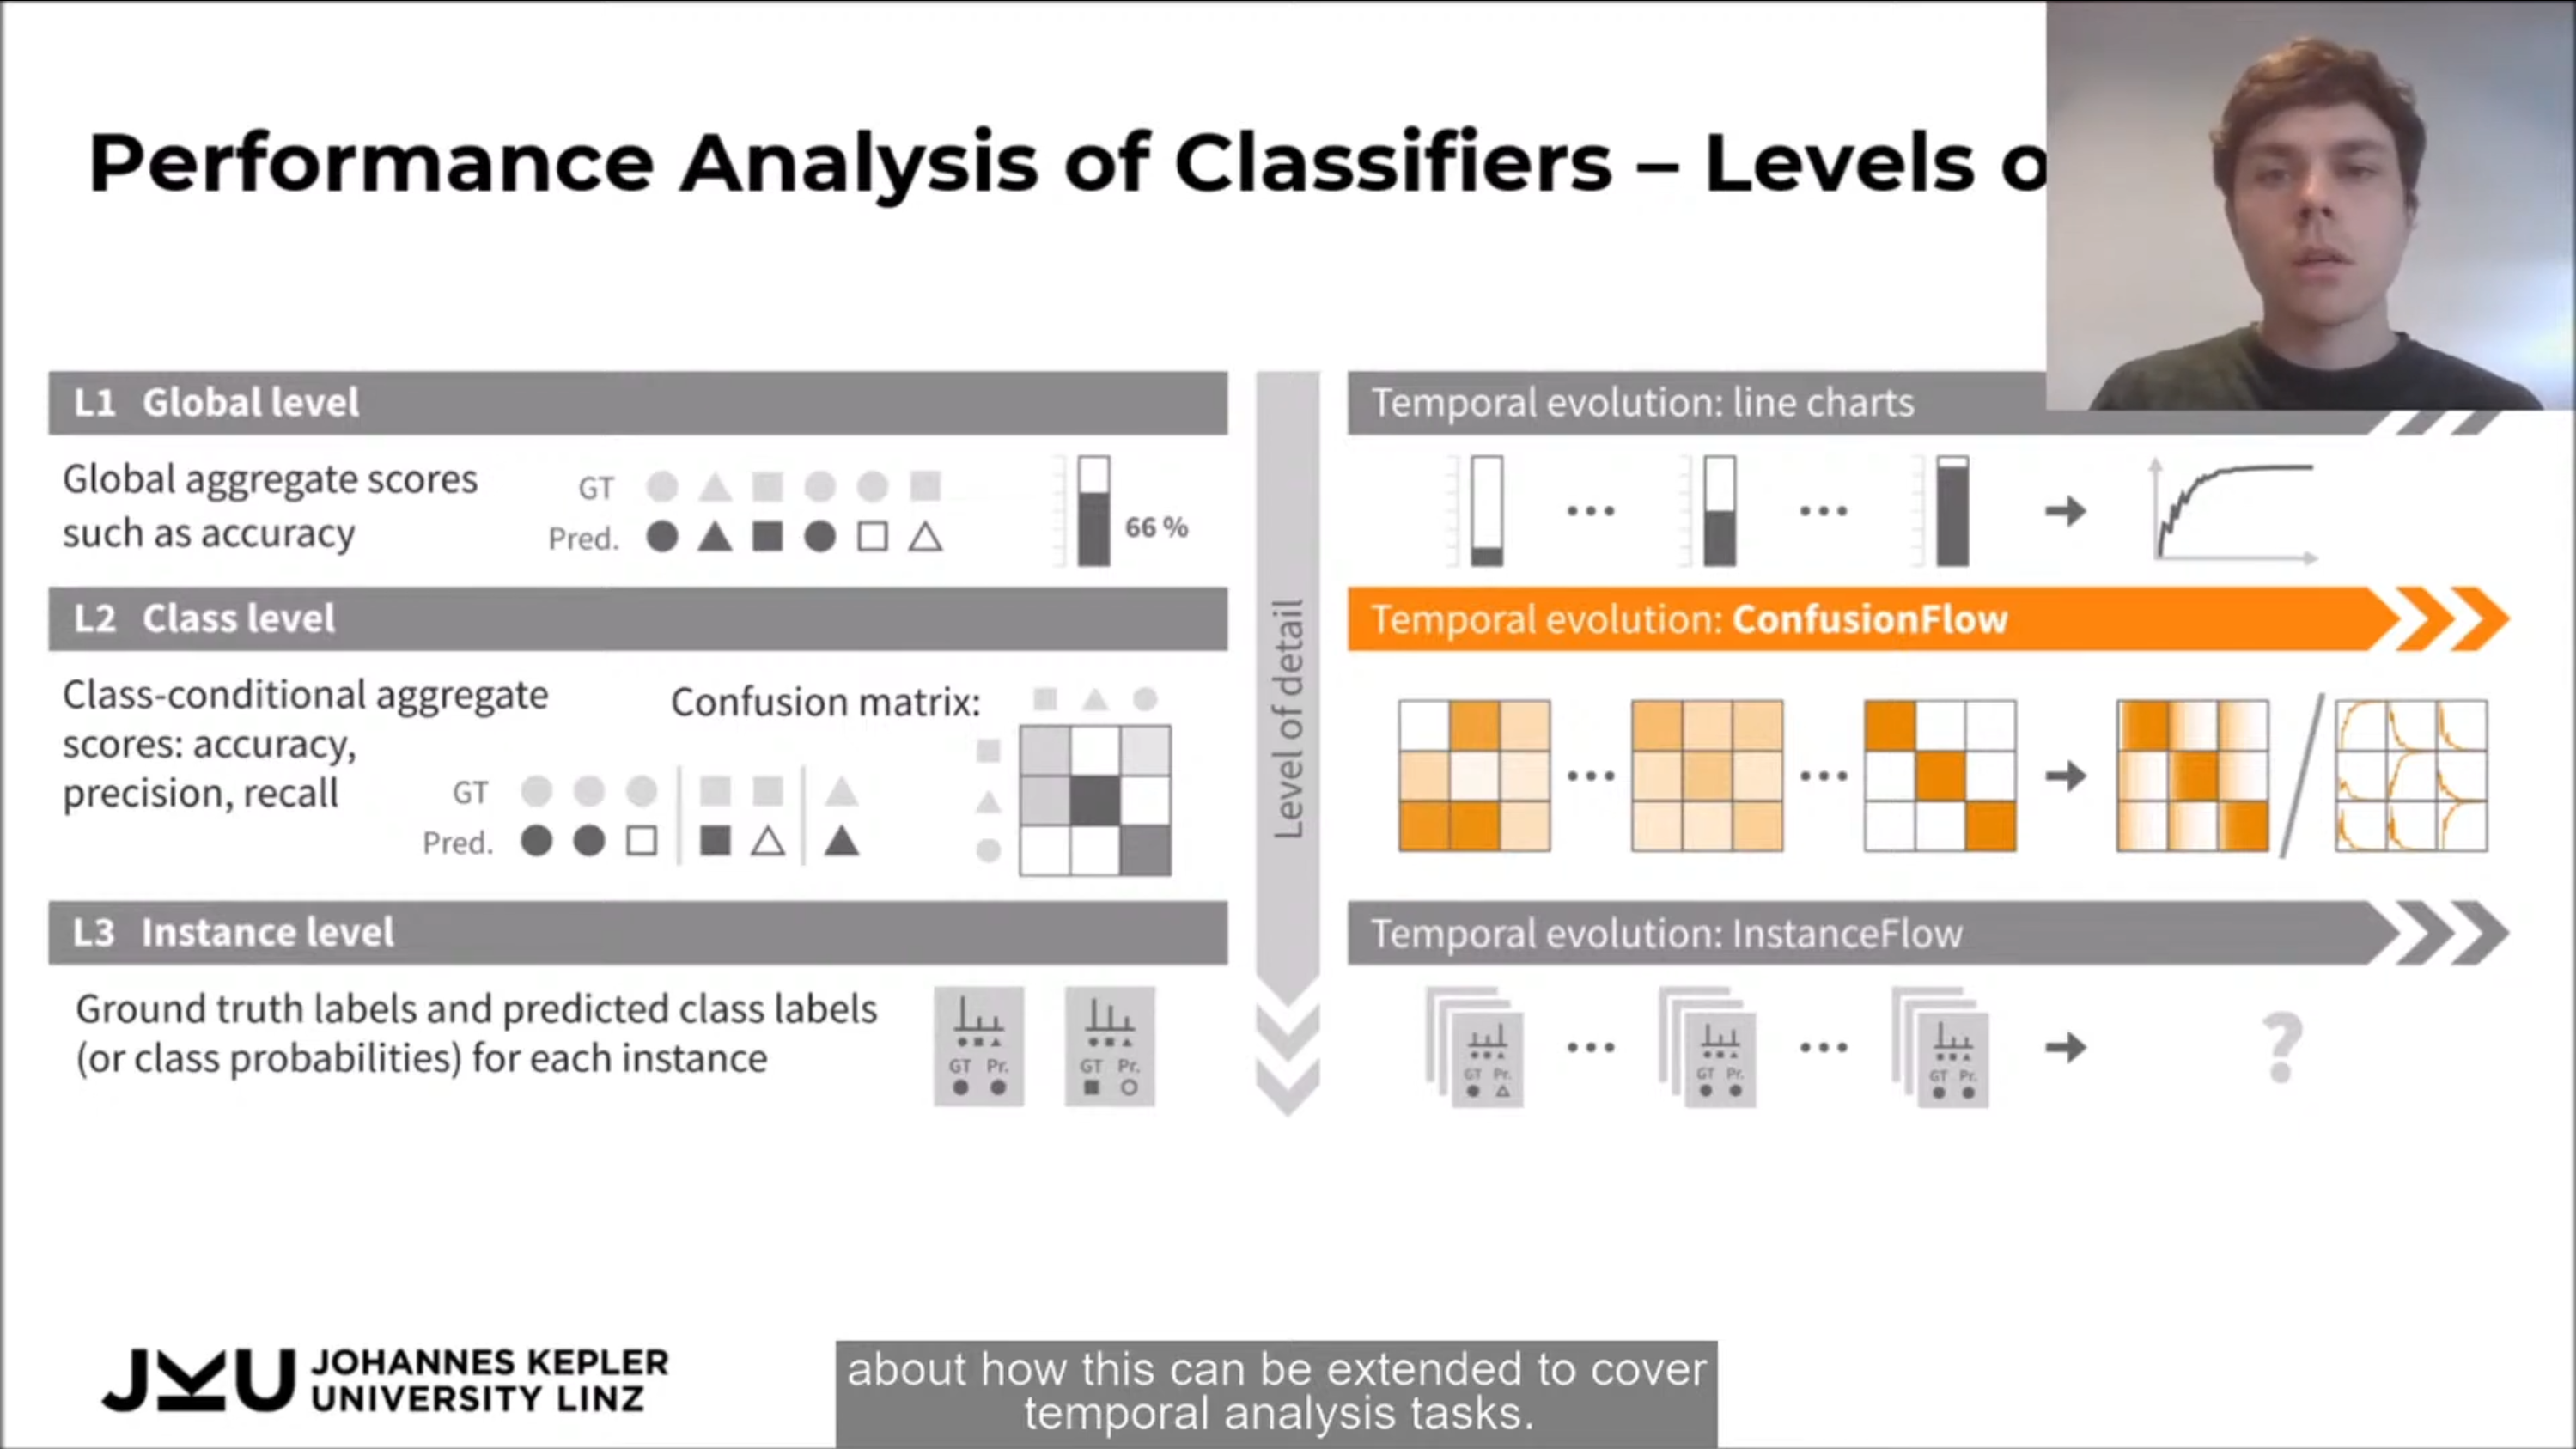 Performance levels of classifiers